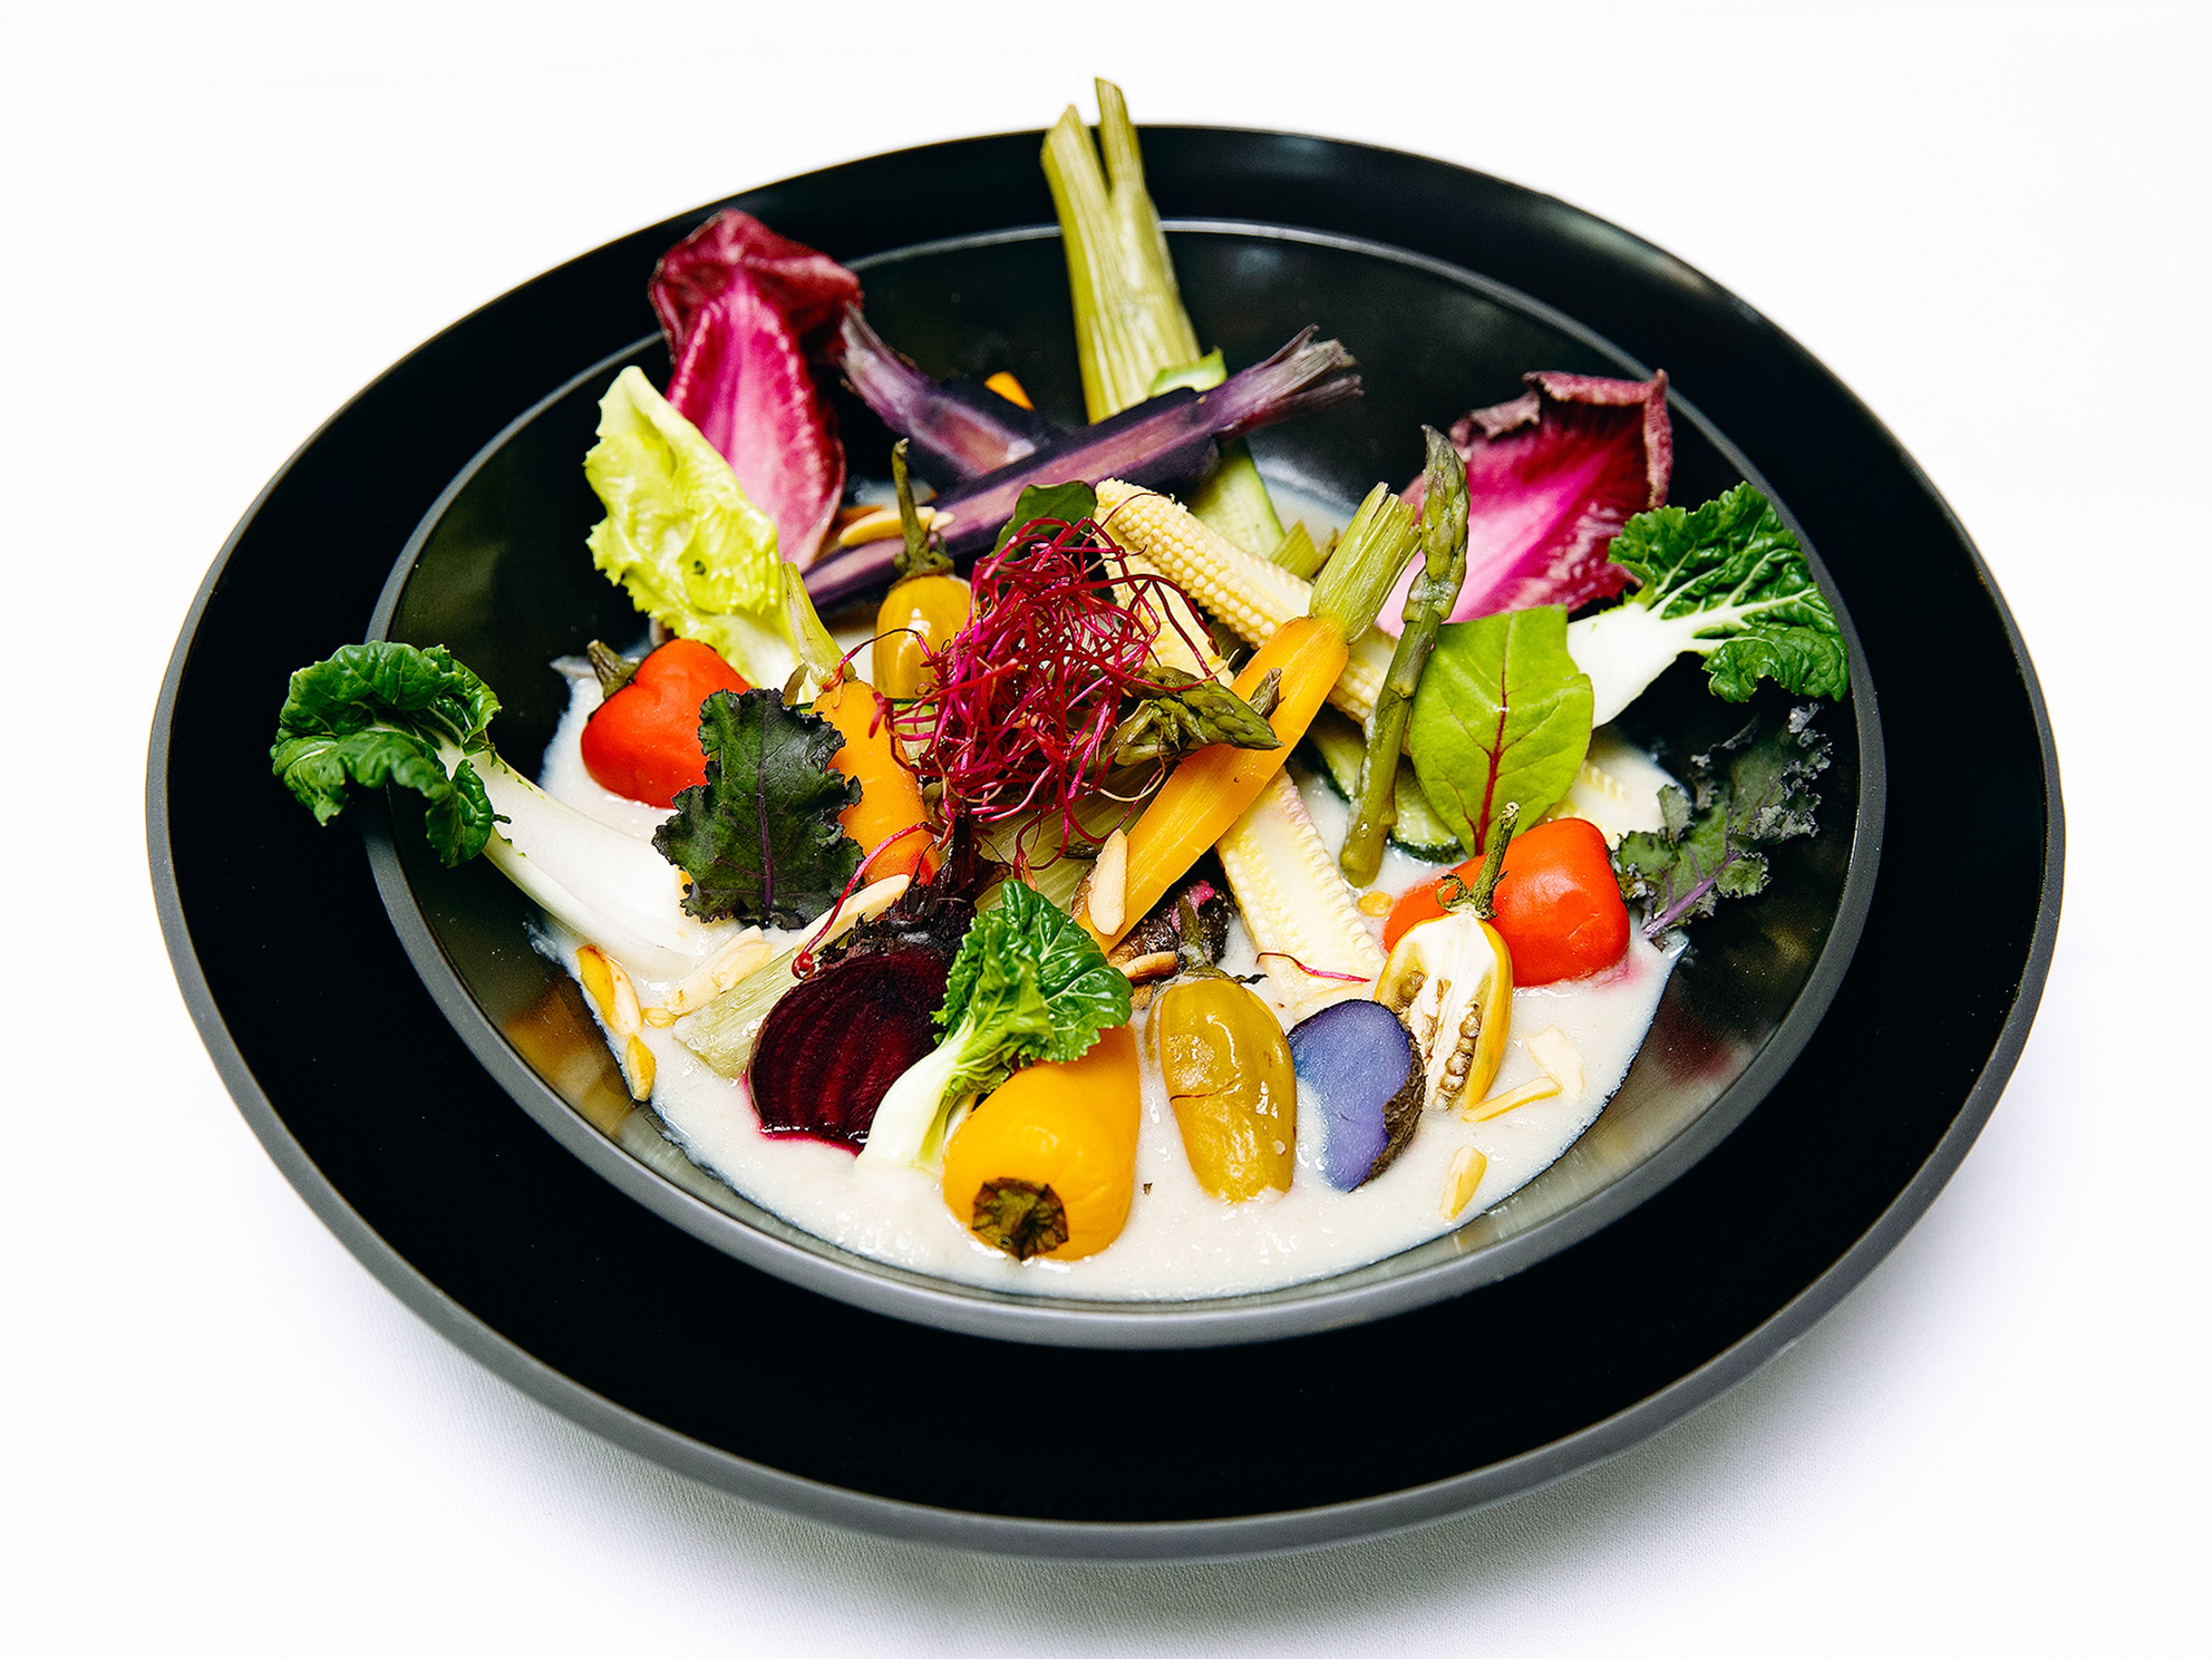 Steamed vegetables with sunchoke sauce